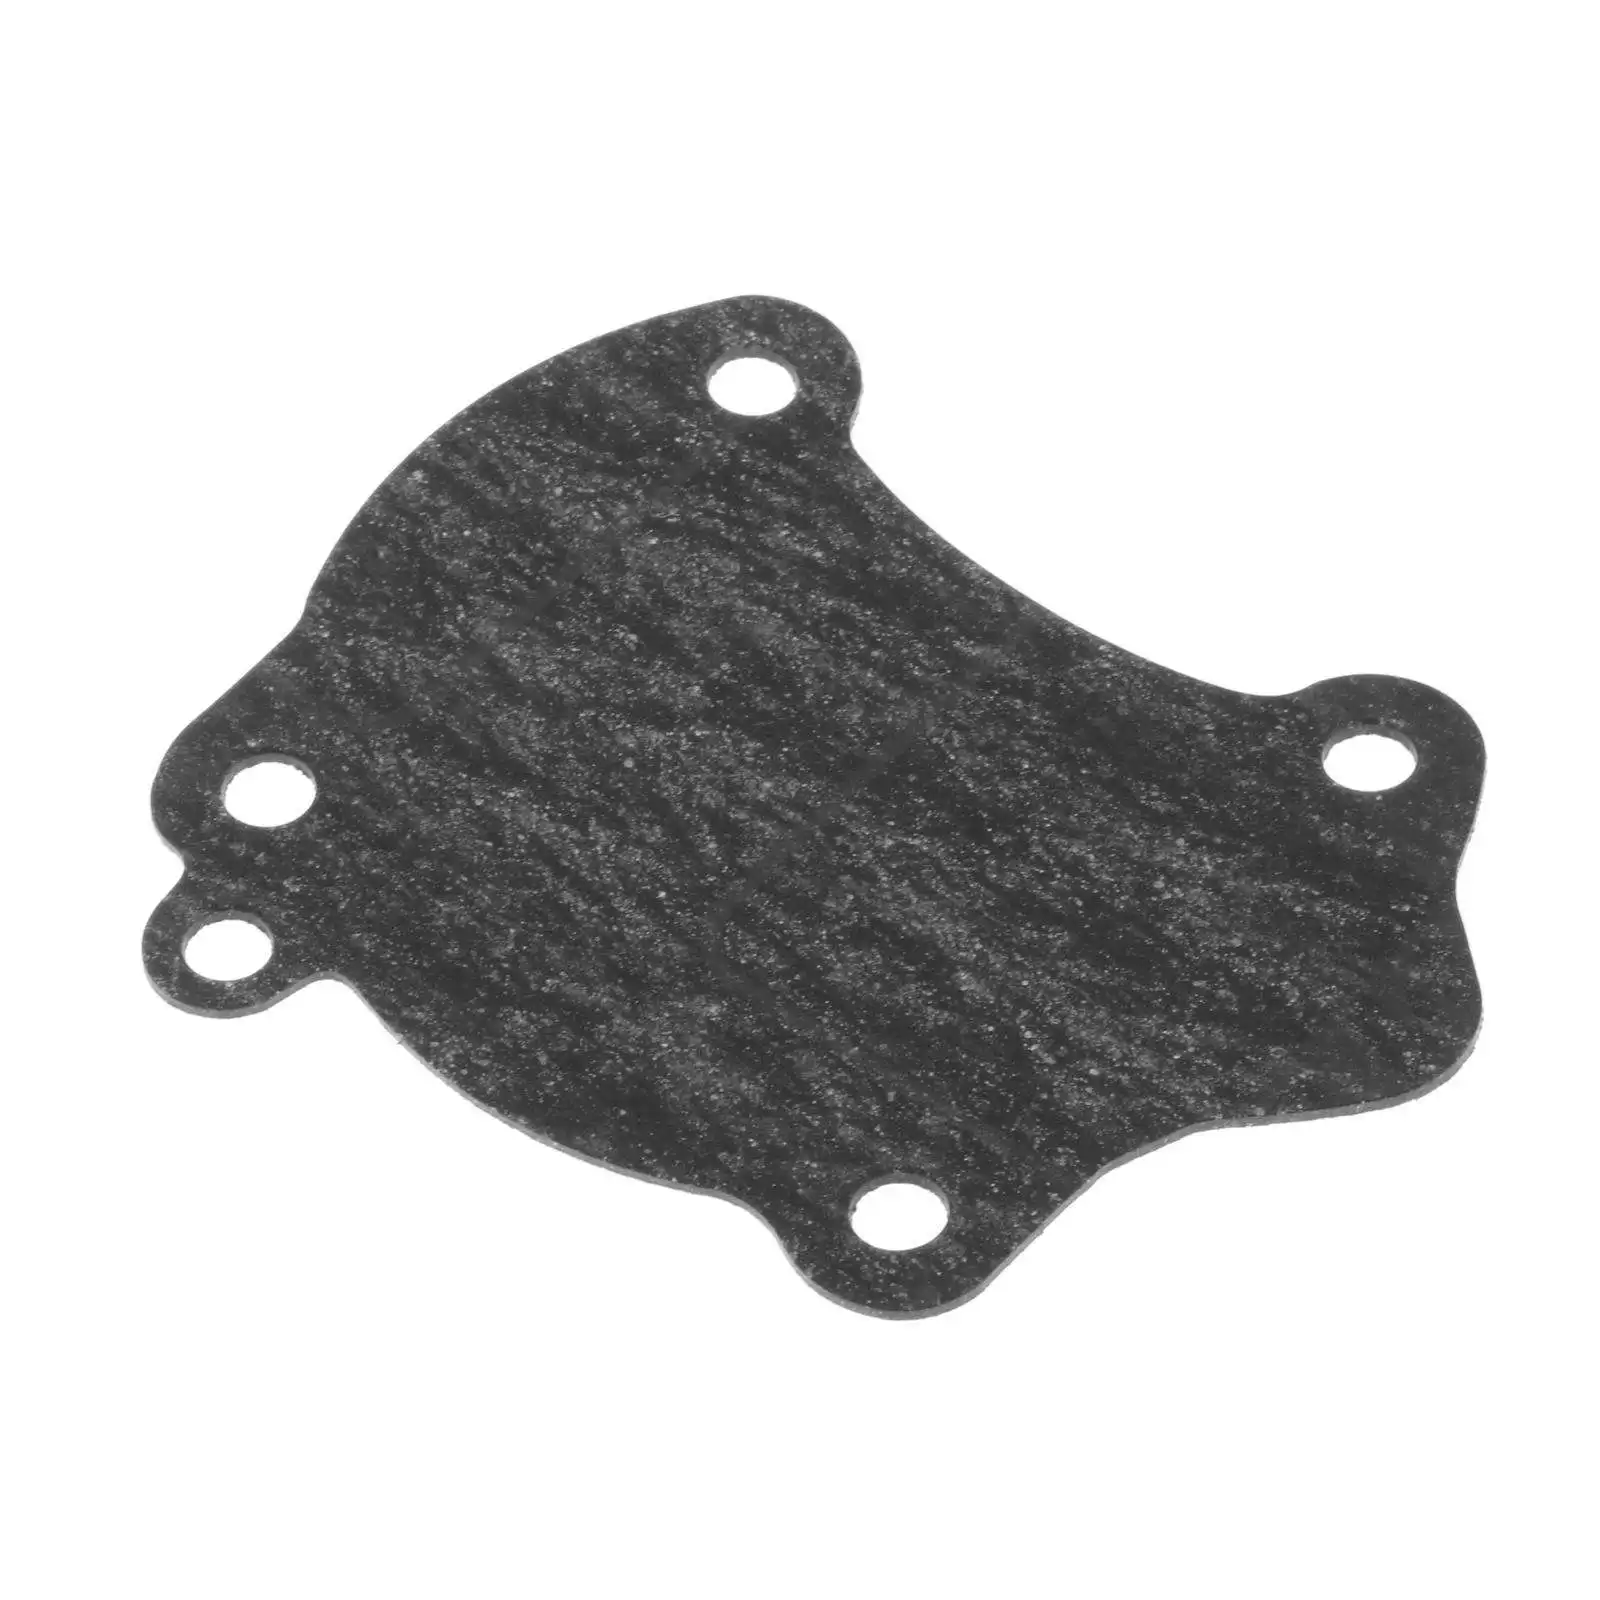 New Head Cover Gasket Repair Parts Fits for Yamaha Outboard 4 hp 5 hp 2 stroke 6E0-11193-A1